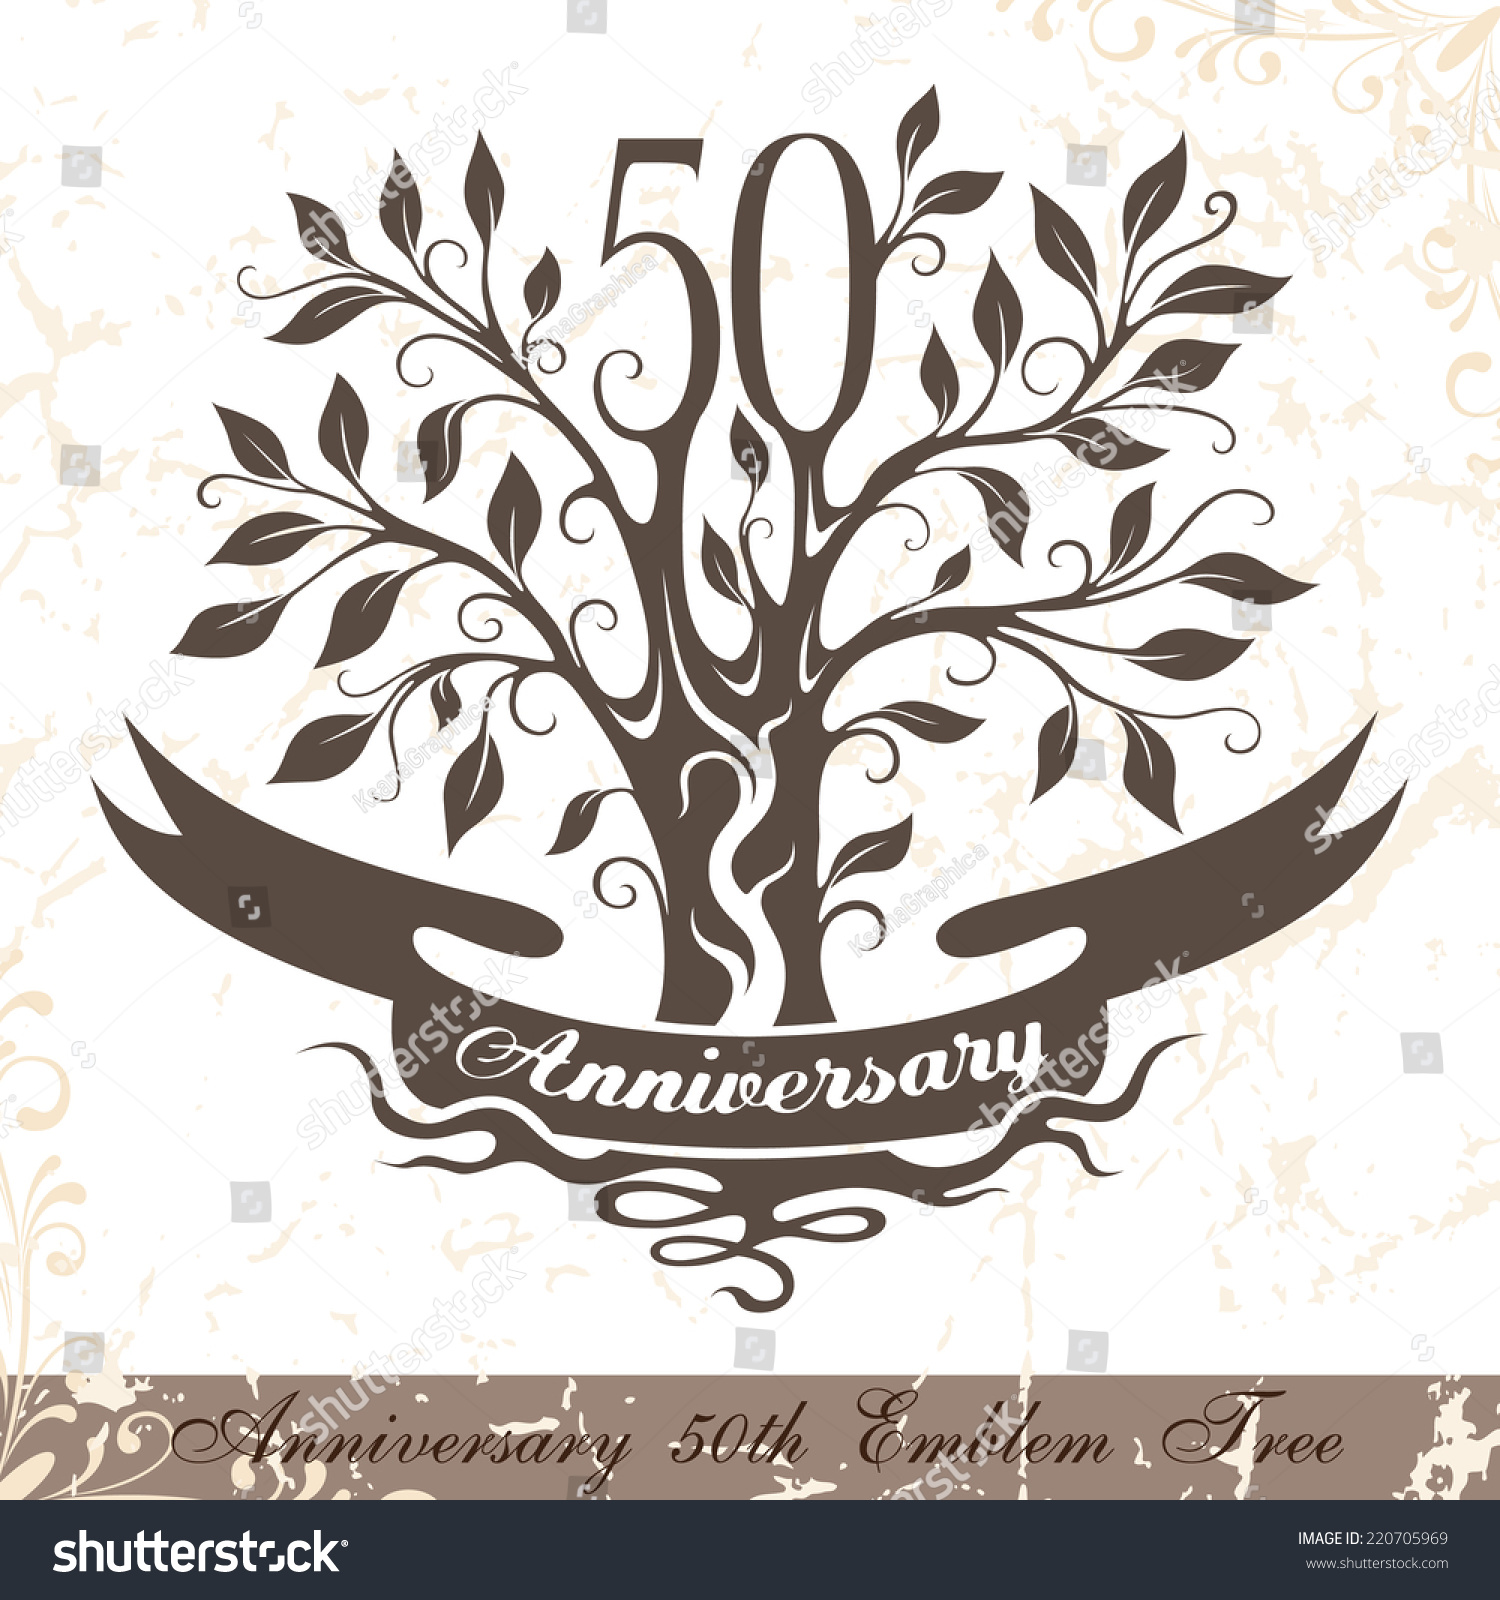 SVG of Anniversary 50th emblem tree in classic style. Ornamental decoration with copy space on the ribbon. Vector template for wedding, birthday and jubilee celebration  svg